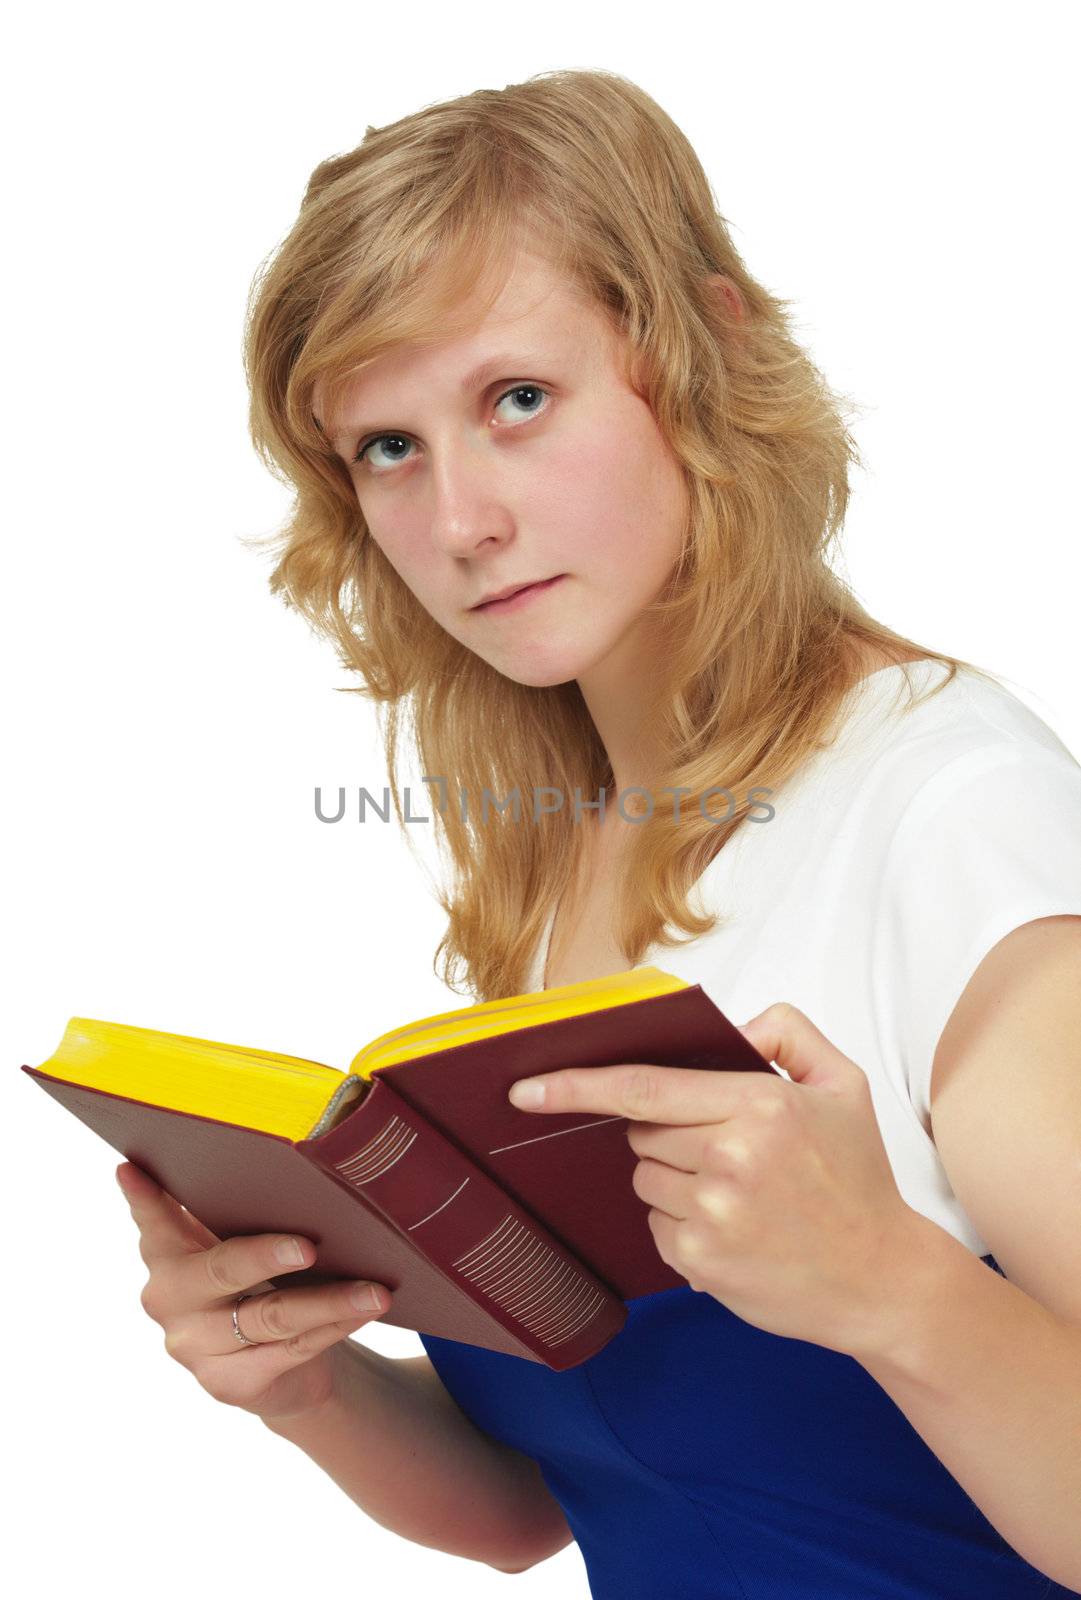 The girl - student reading textbook by pzaxe